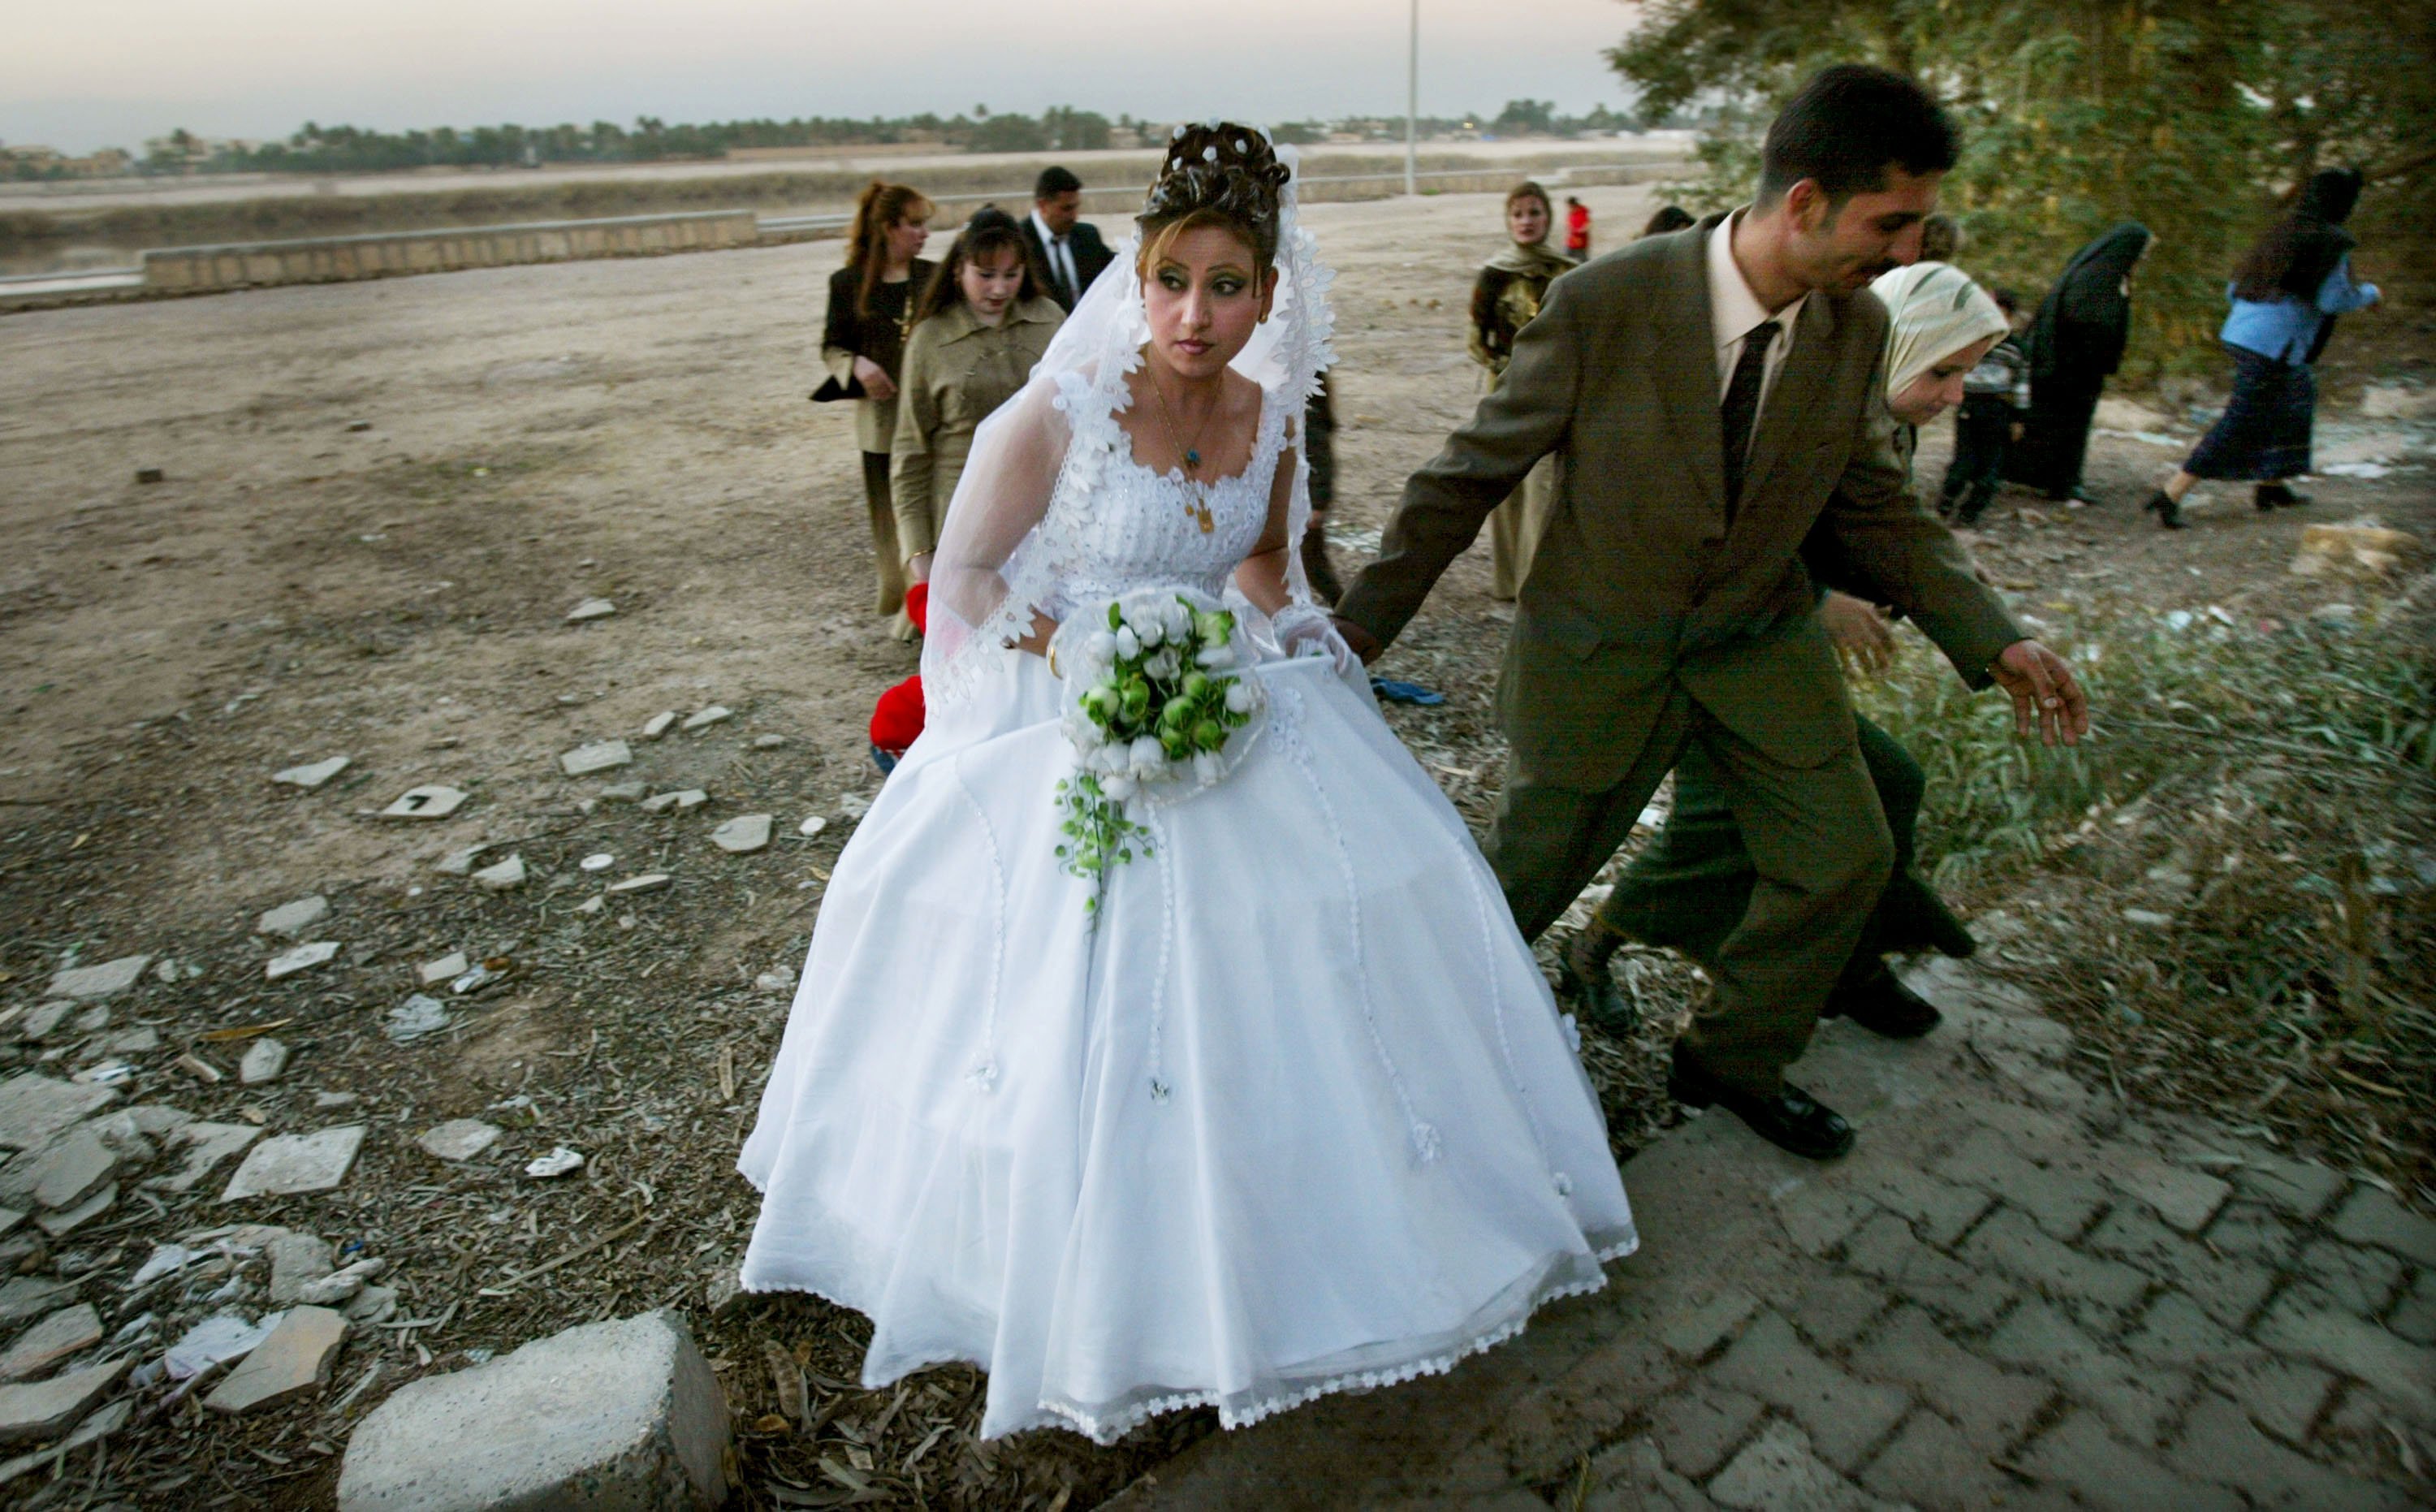 A newly married Iraqi couple walks away from the banks of the Tigris River after posing for photographs February 9, 2004 in Baghdad, Iraq. | Getty Images :photo